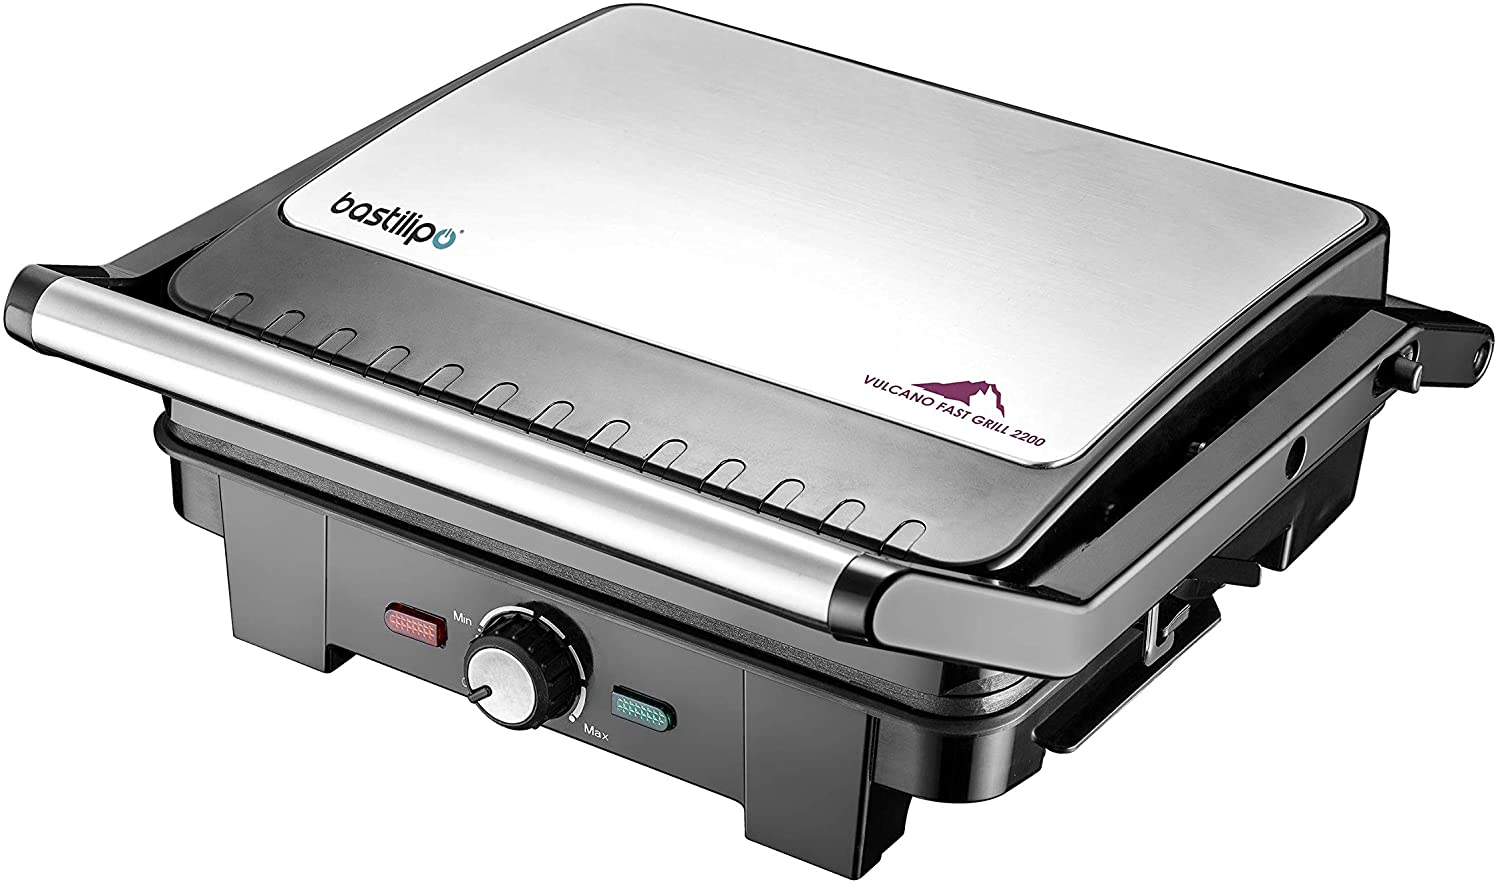 Bastilipo - Vulcano Fast Grill 2200 - Double Electric Grill - Sandwich Toaster - Grill - 2200 W Power with 180 Degree Opening and PFOA-Free, Non-Stick Coating Plates 0609